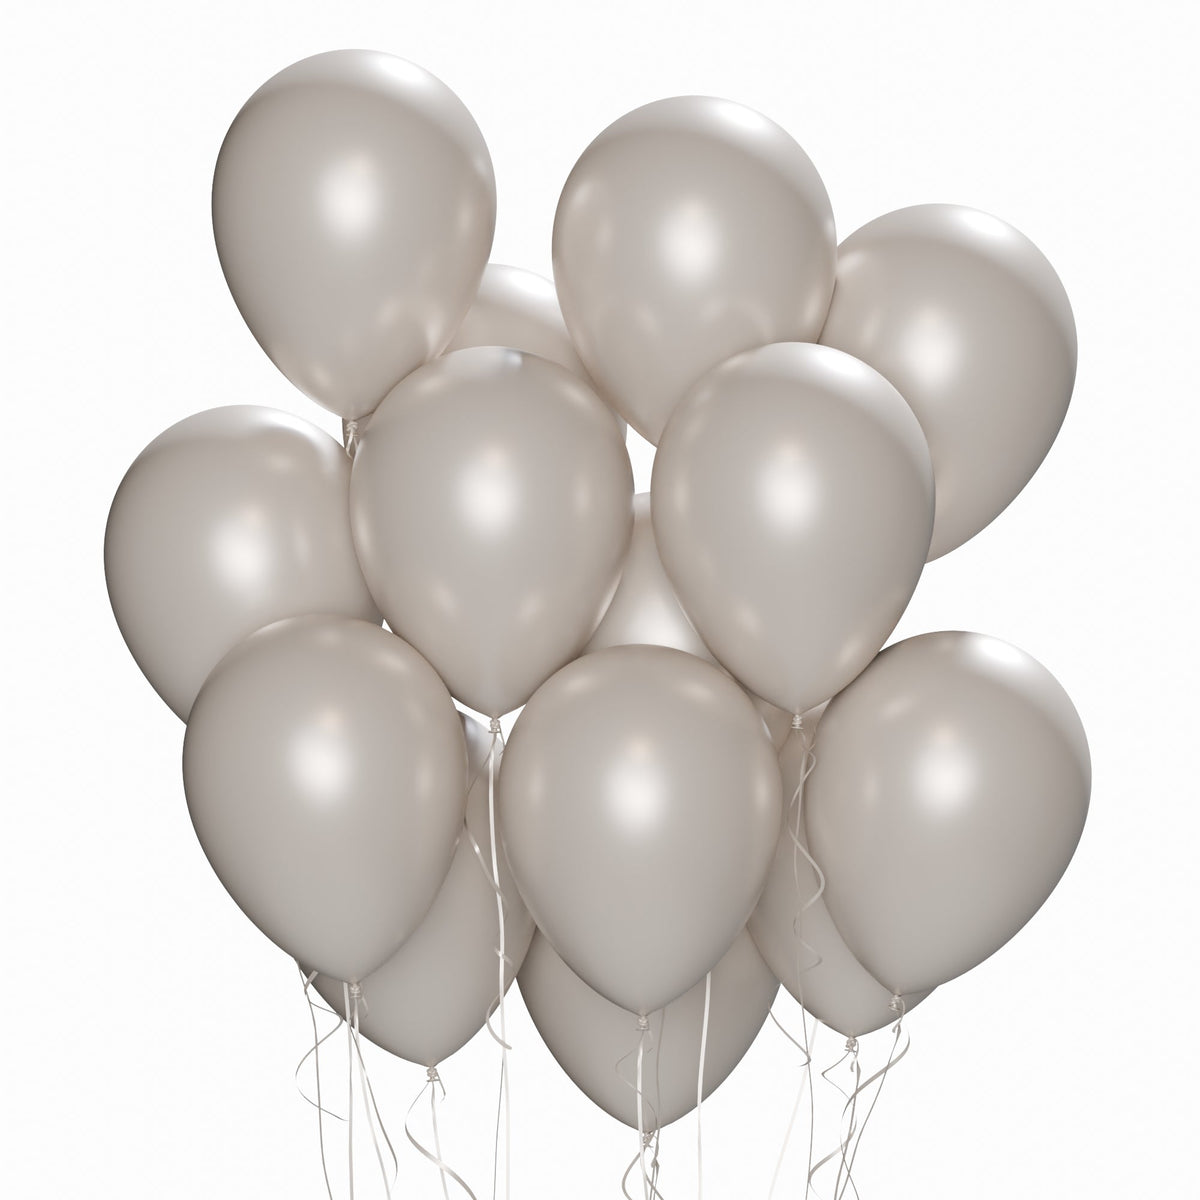 WIDE OCEAN INTERNATIONAL TRADE BEIJING CO., LTD Balloons Silver Latex Balloon 12 Inches, Pearl Collection, 15 Count 810064198281